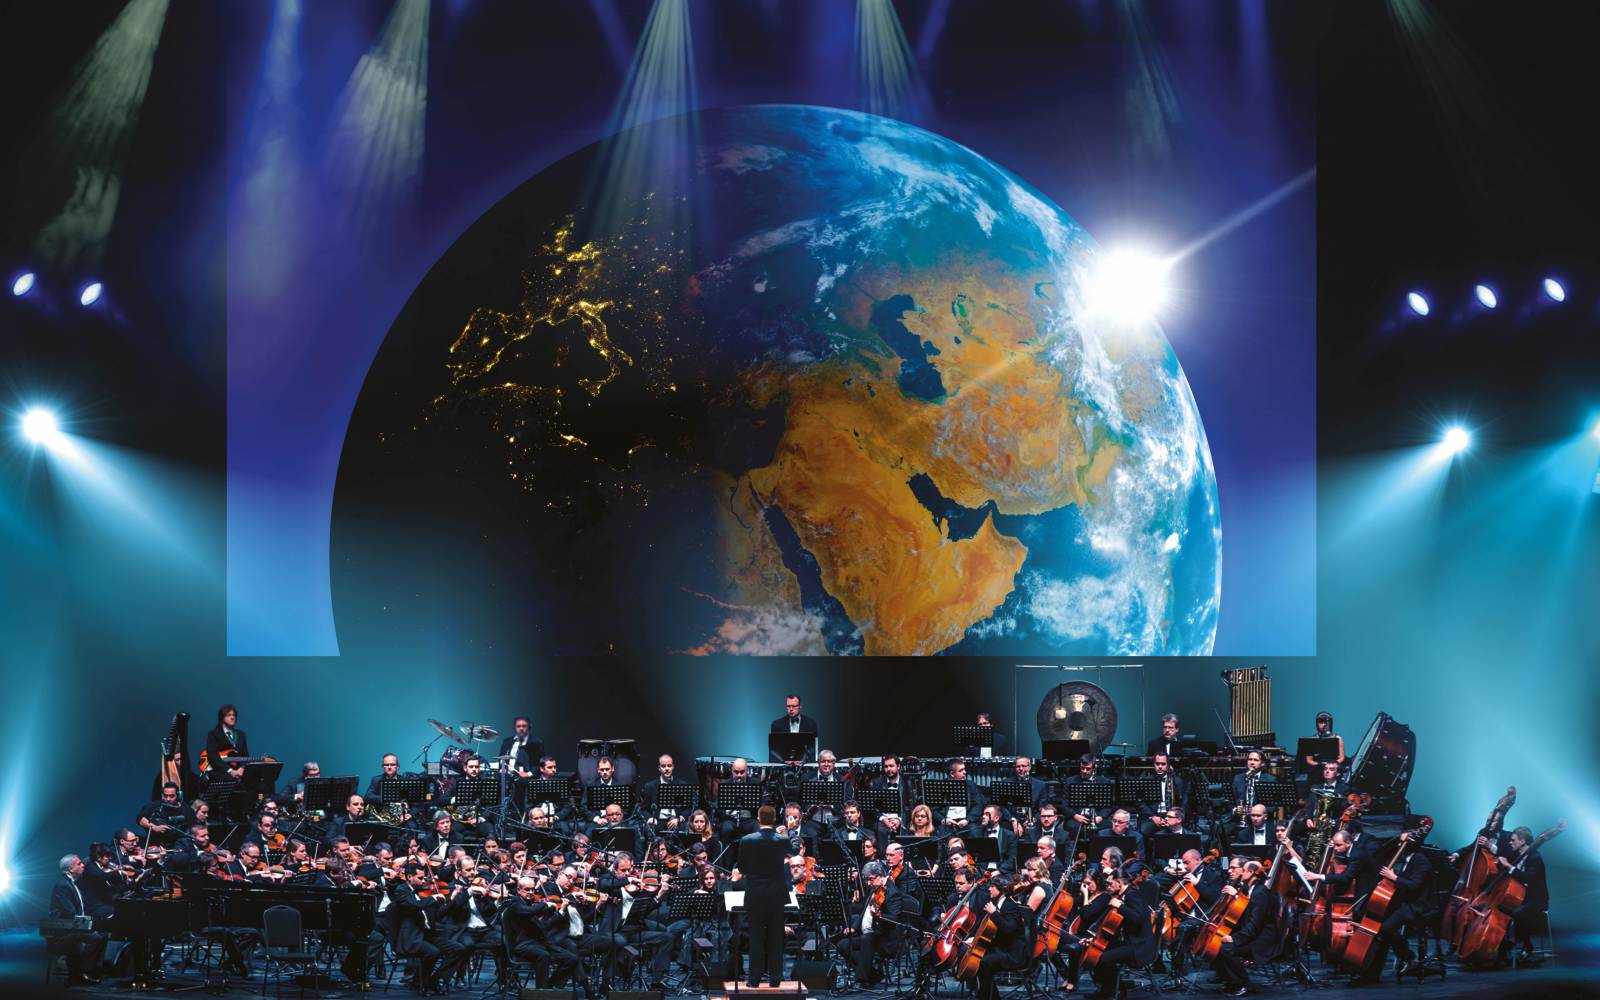 orchestra playing the Our Planet Live Concert